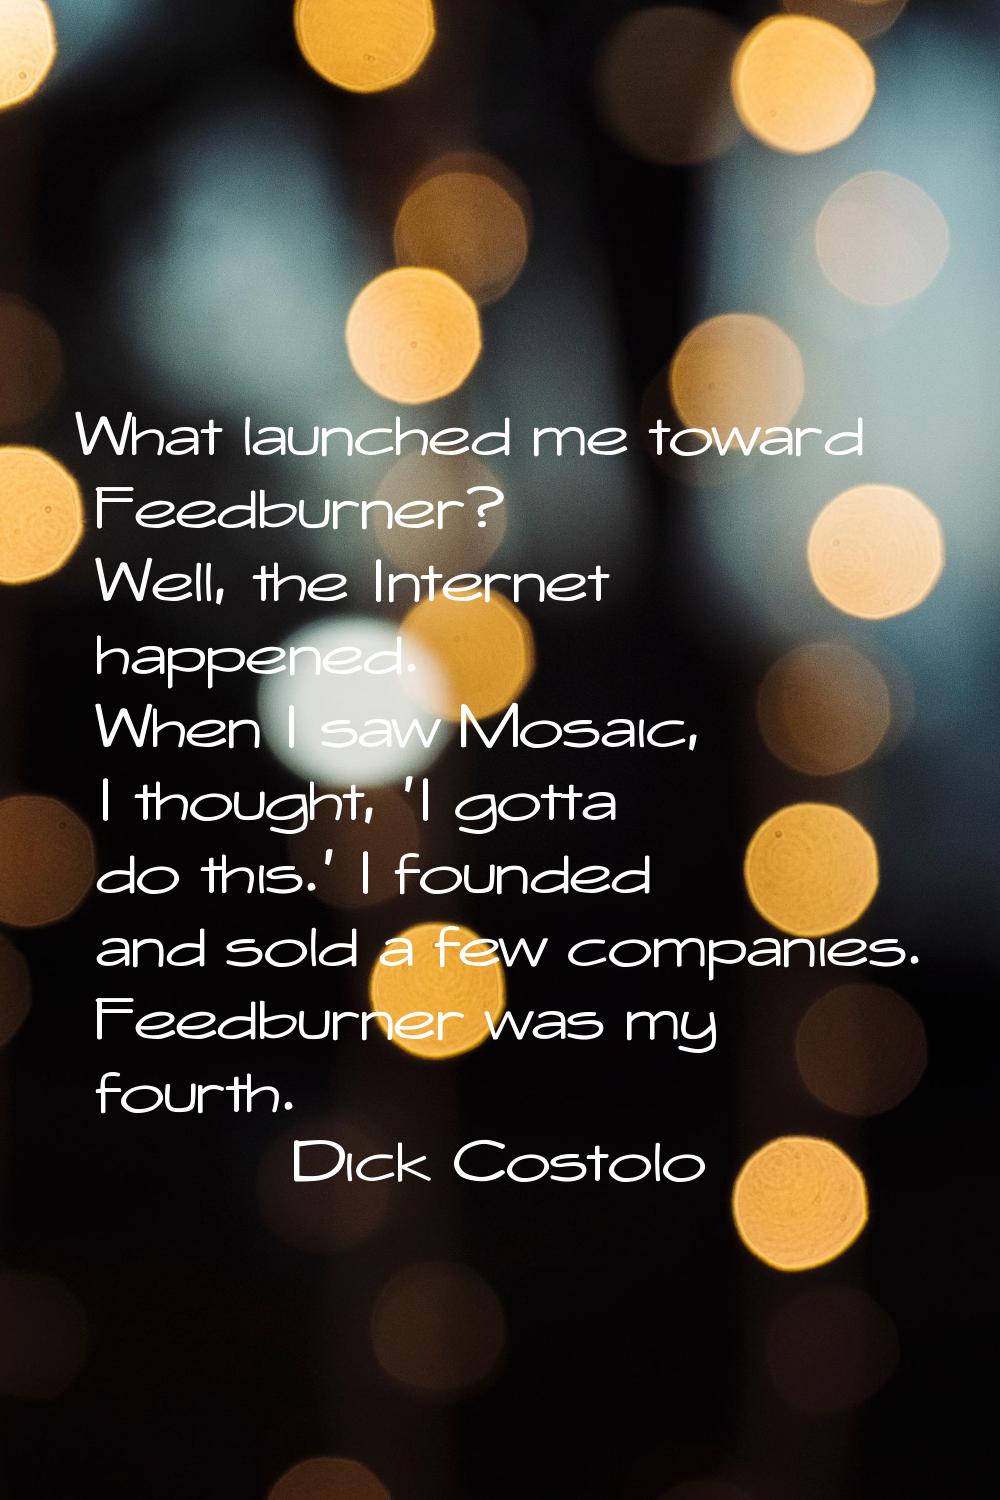 What launched me toward Feedburner? Well, the Internet happened. When I saw Mosaic, I thought, 'I g